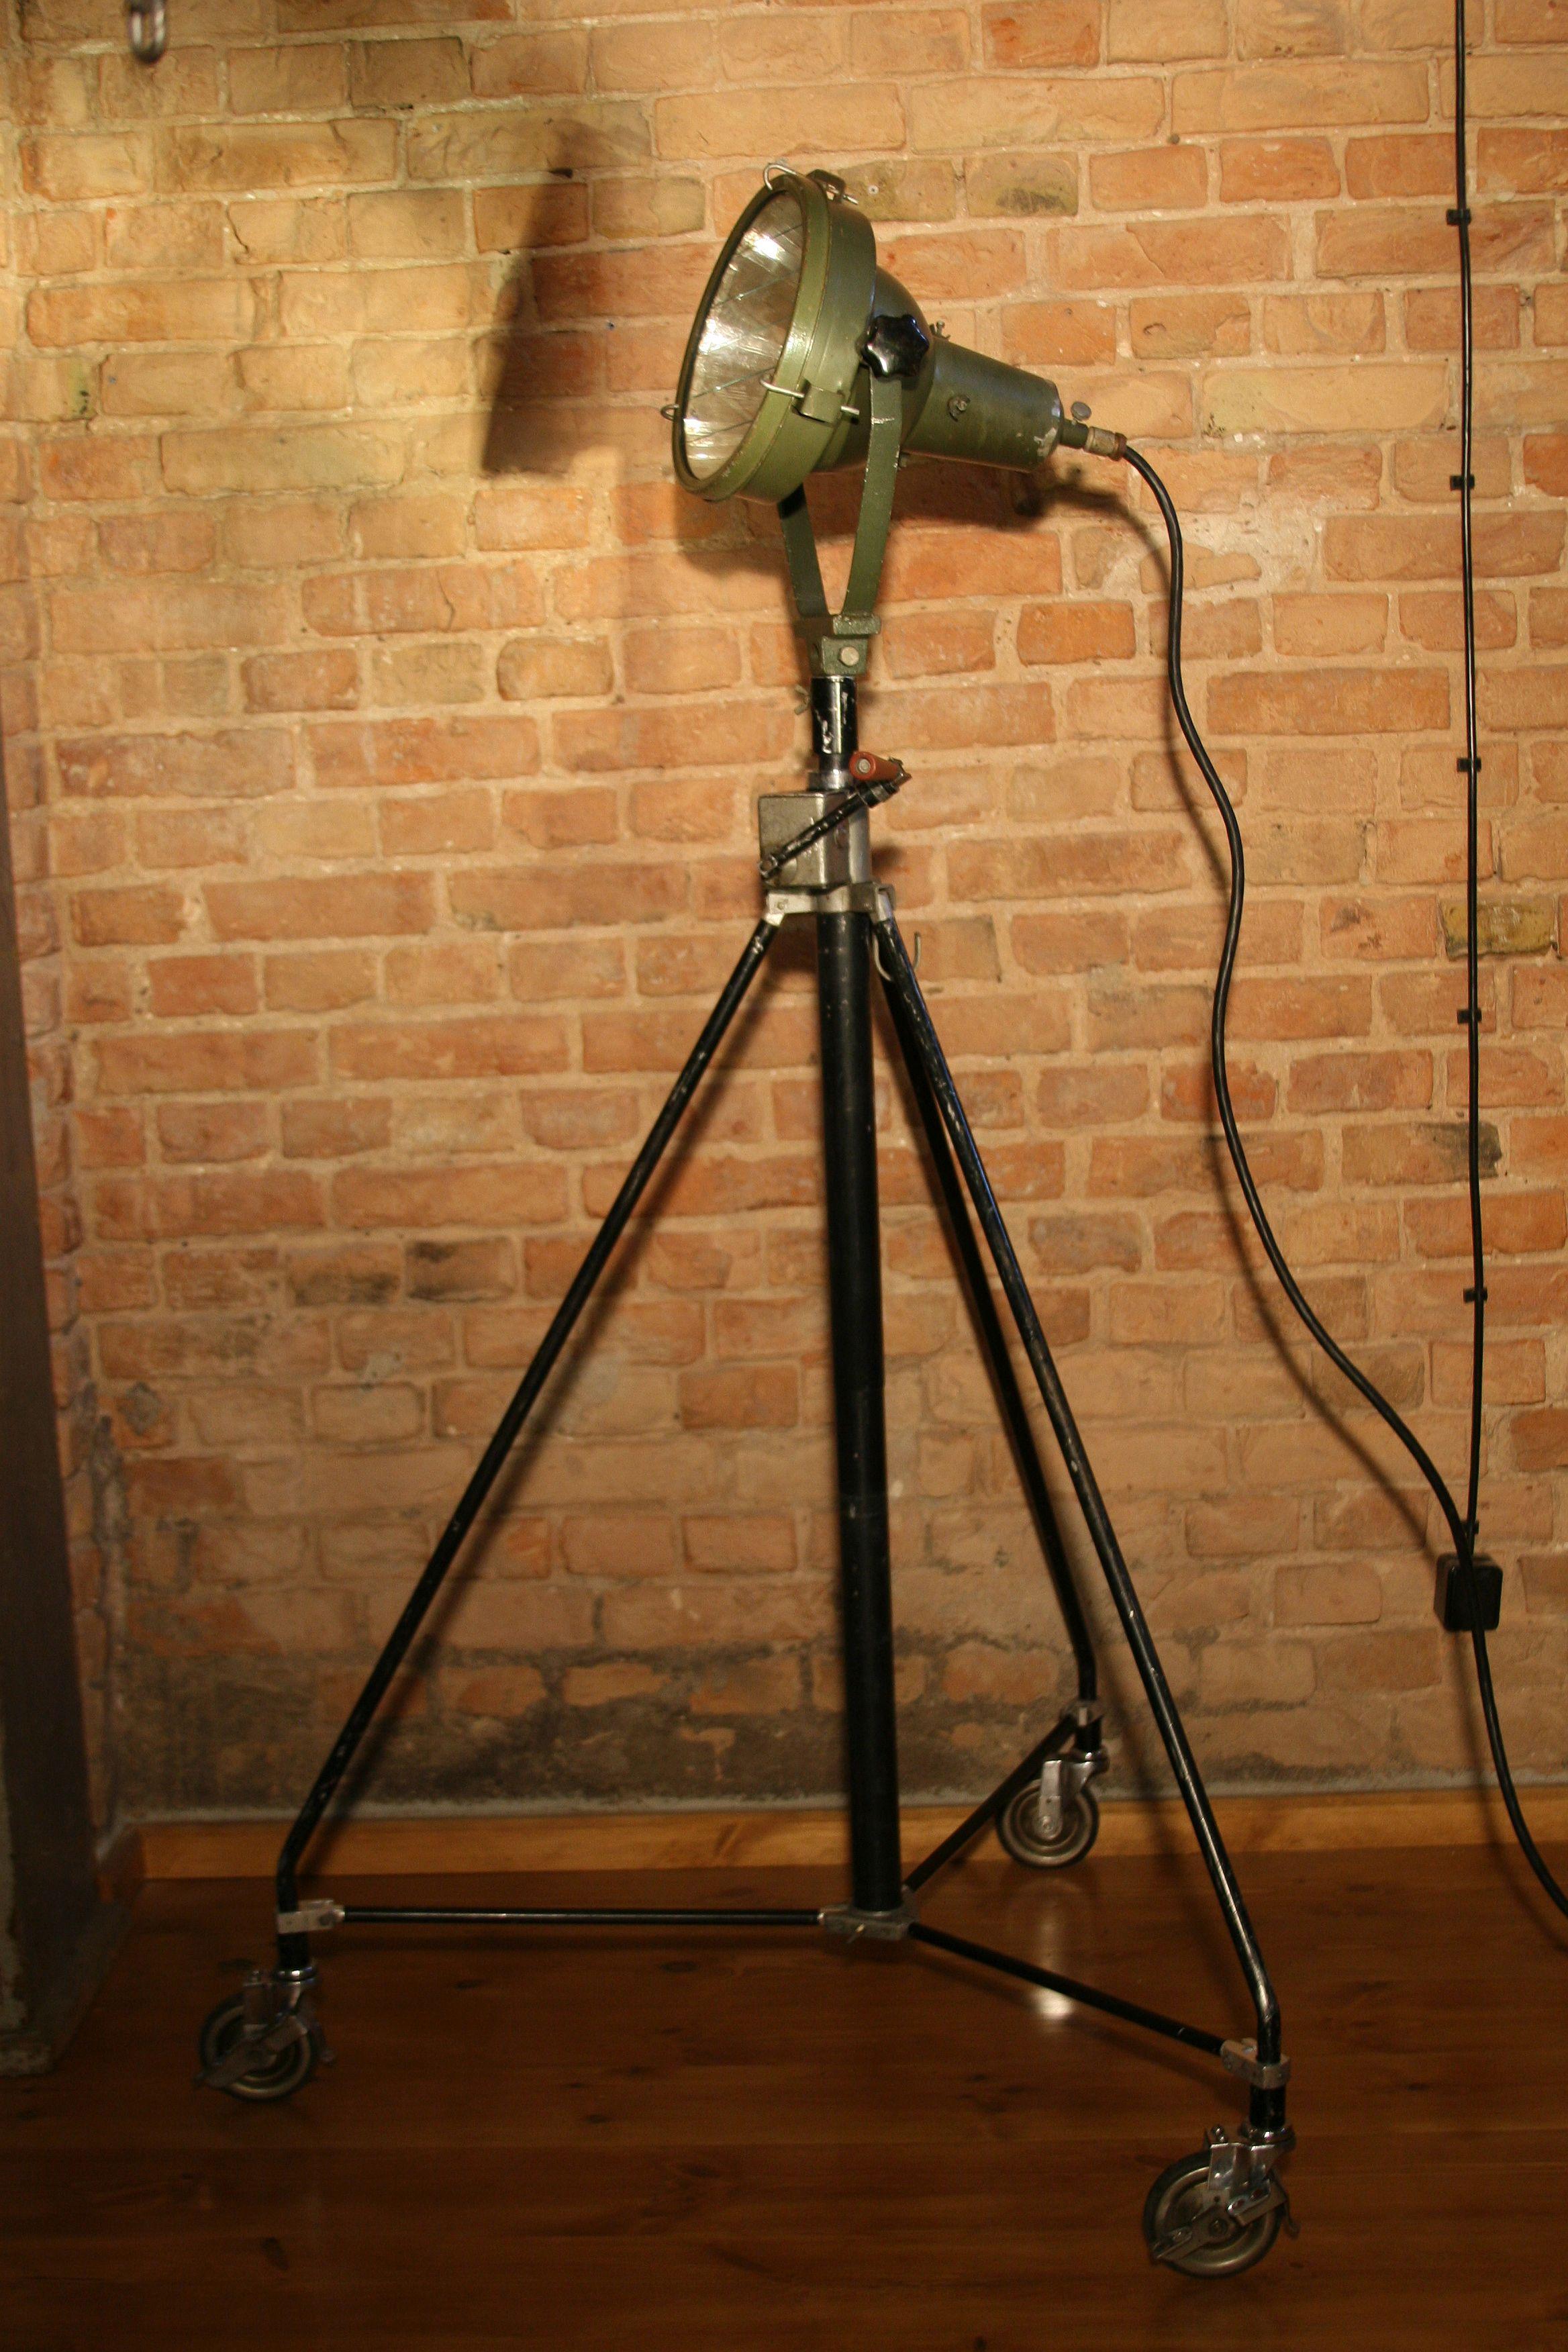 A military spotlight from the 1960s, which was a part of the Polish army equipment. It was used to illuminate field hospitals, command posts, temporary field logistic centers and offices.

Construction:
The lamp body is made of pressed aluminum